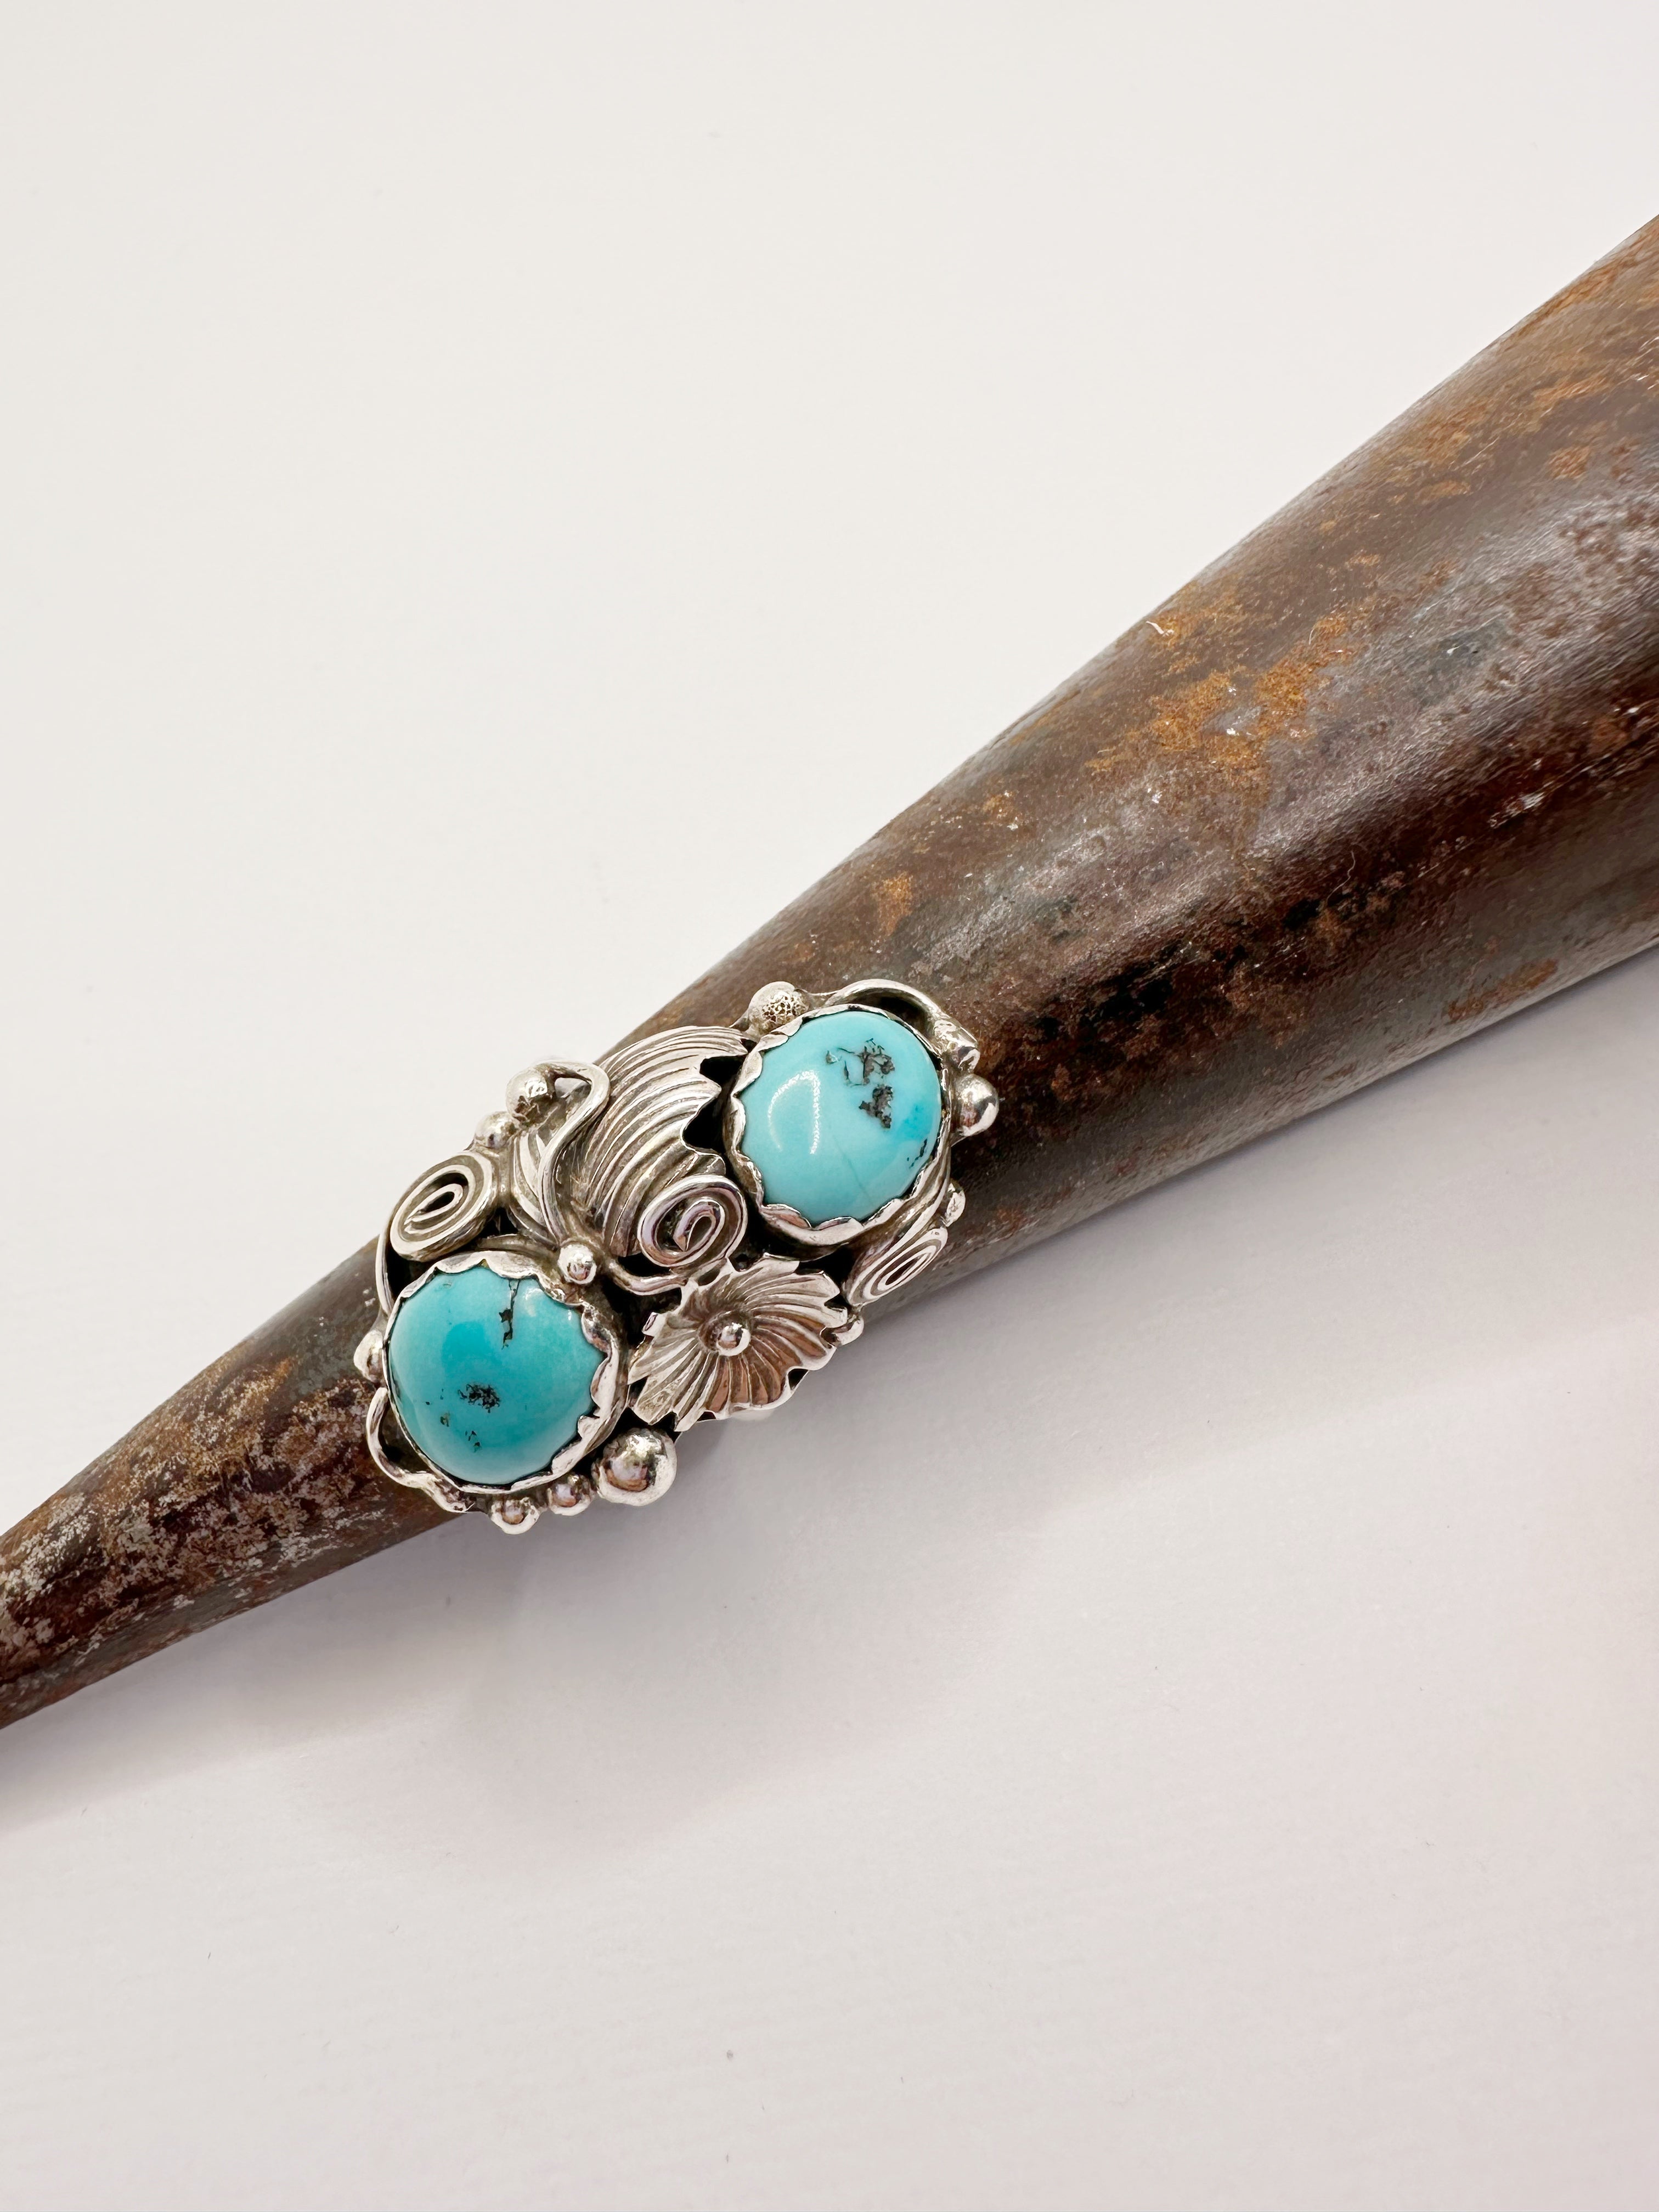 Vintage Turquoise Ring with Sterling Silver Band